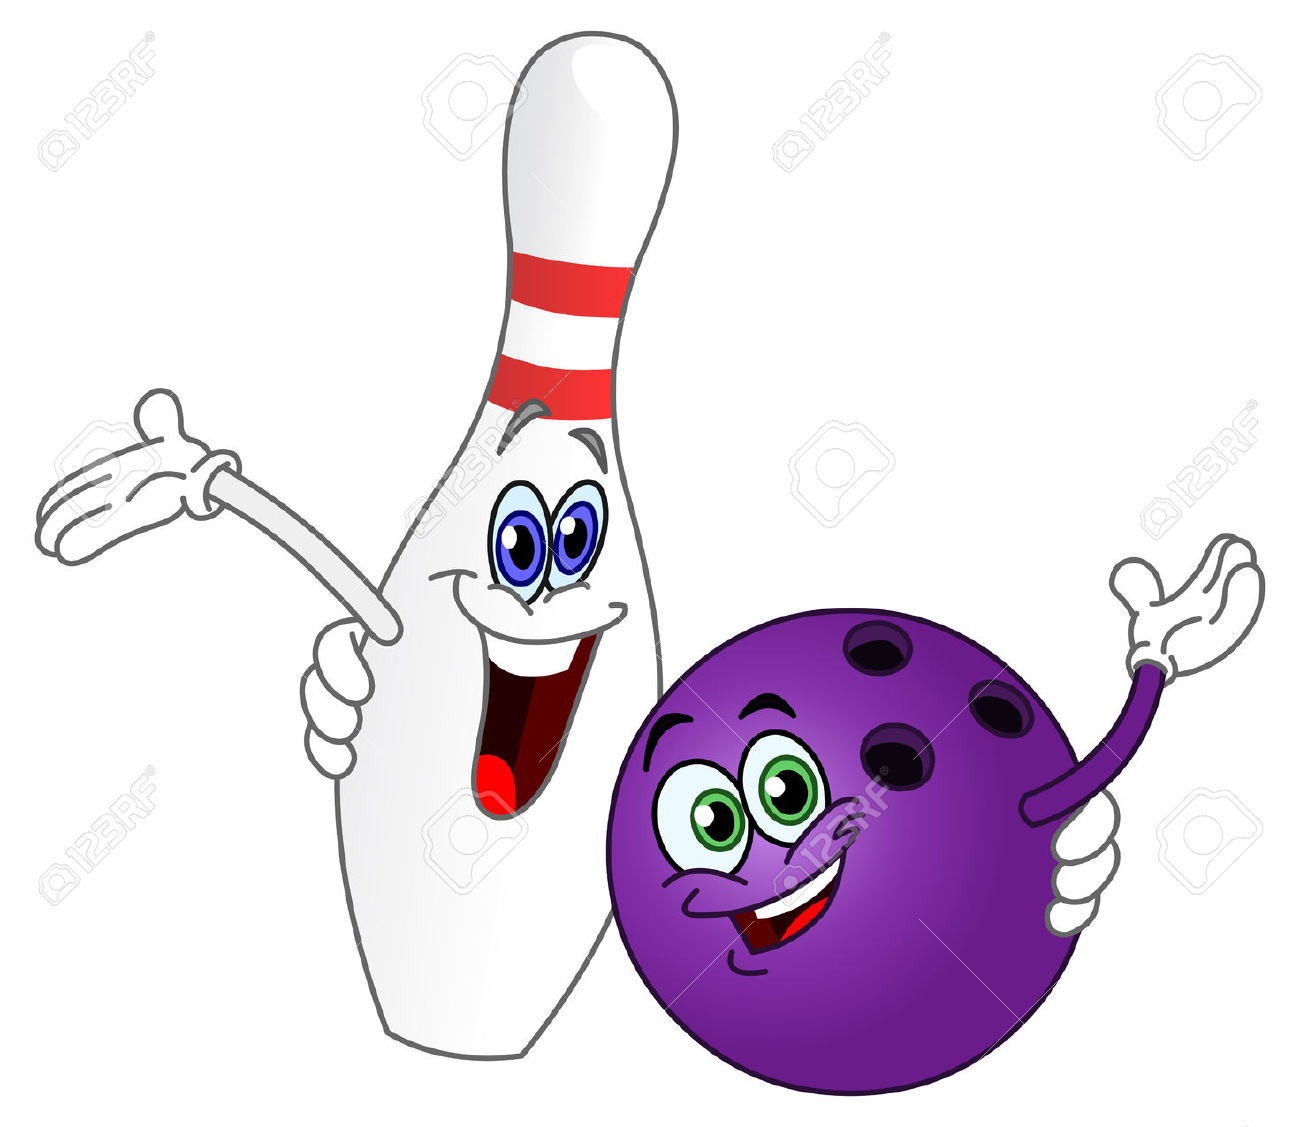 bowling clipart funny - photo #38